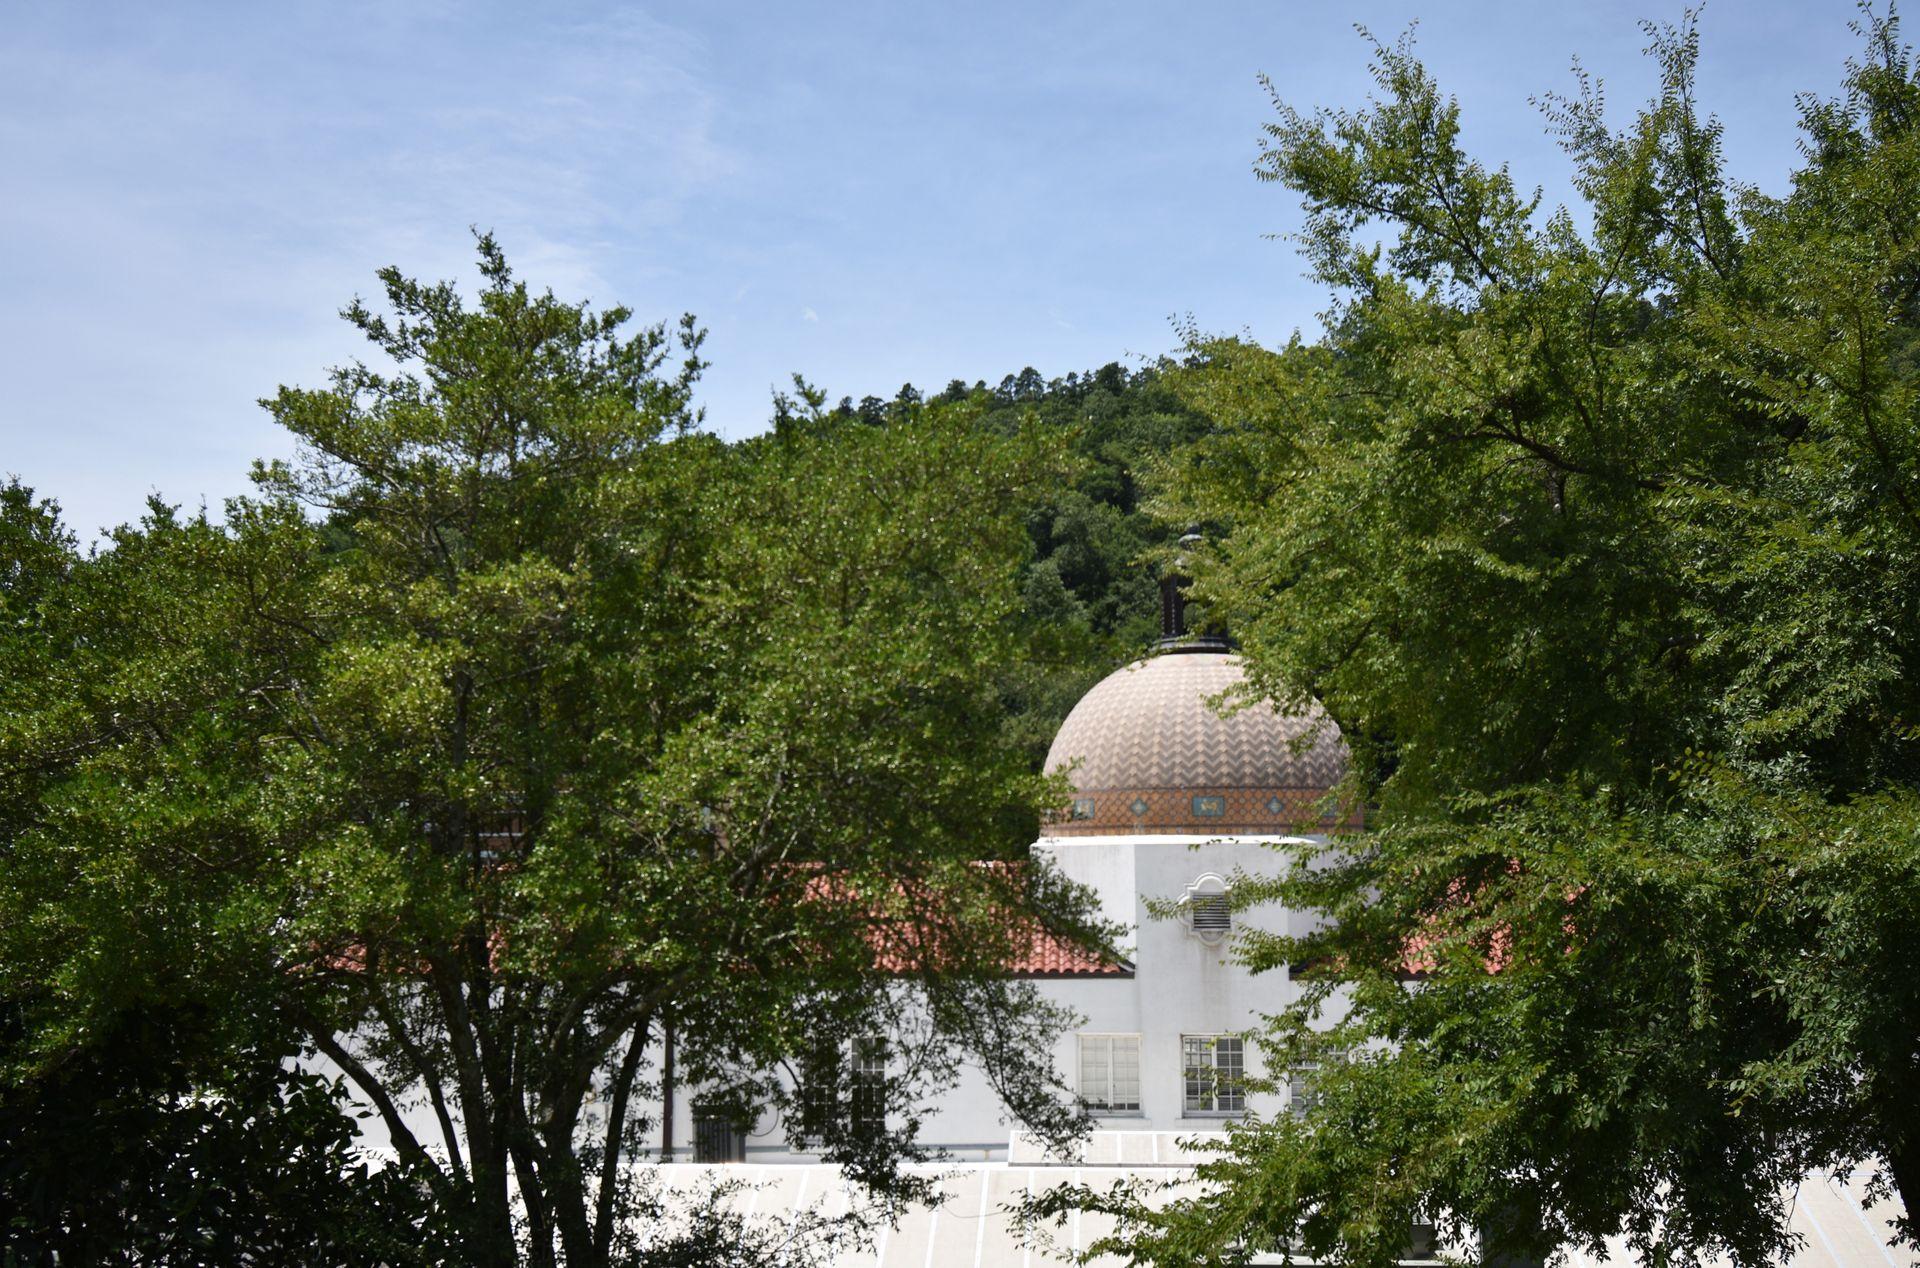 The back of the Quapaw Bathhouse. The building with white with a brown dome and the dome has a geometric pattern.